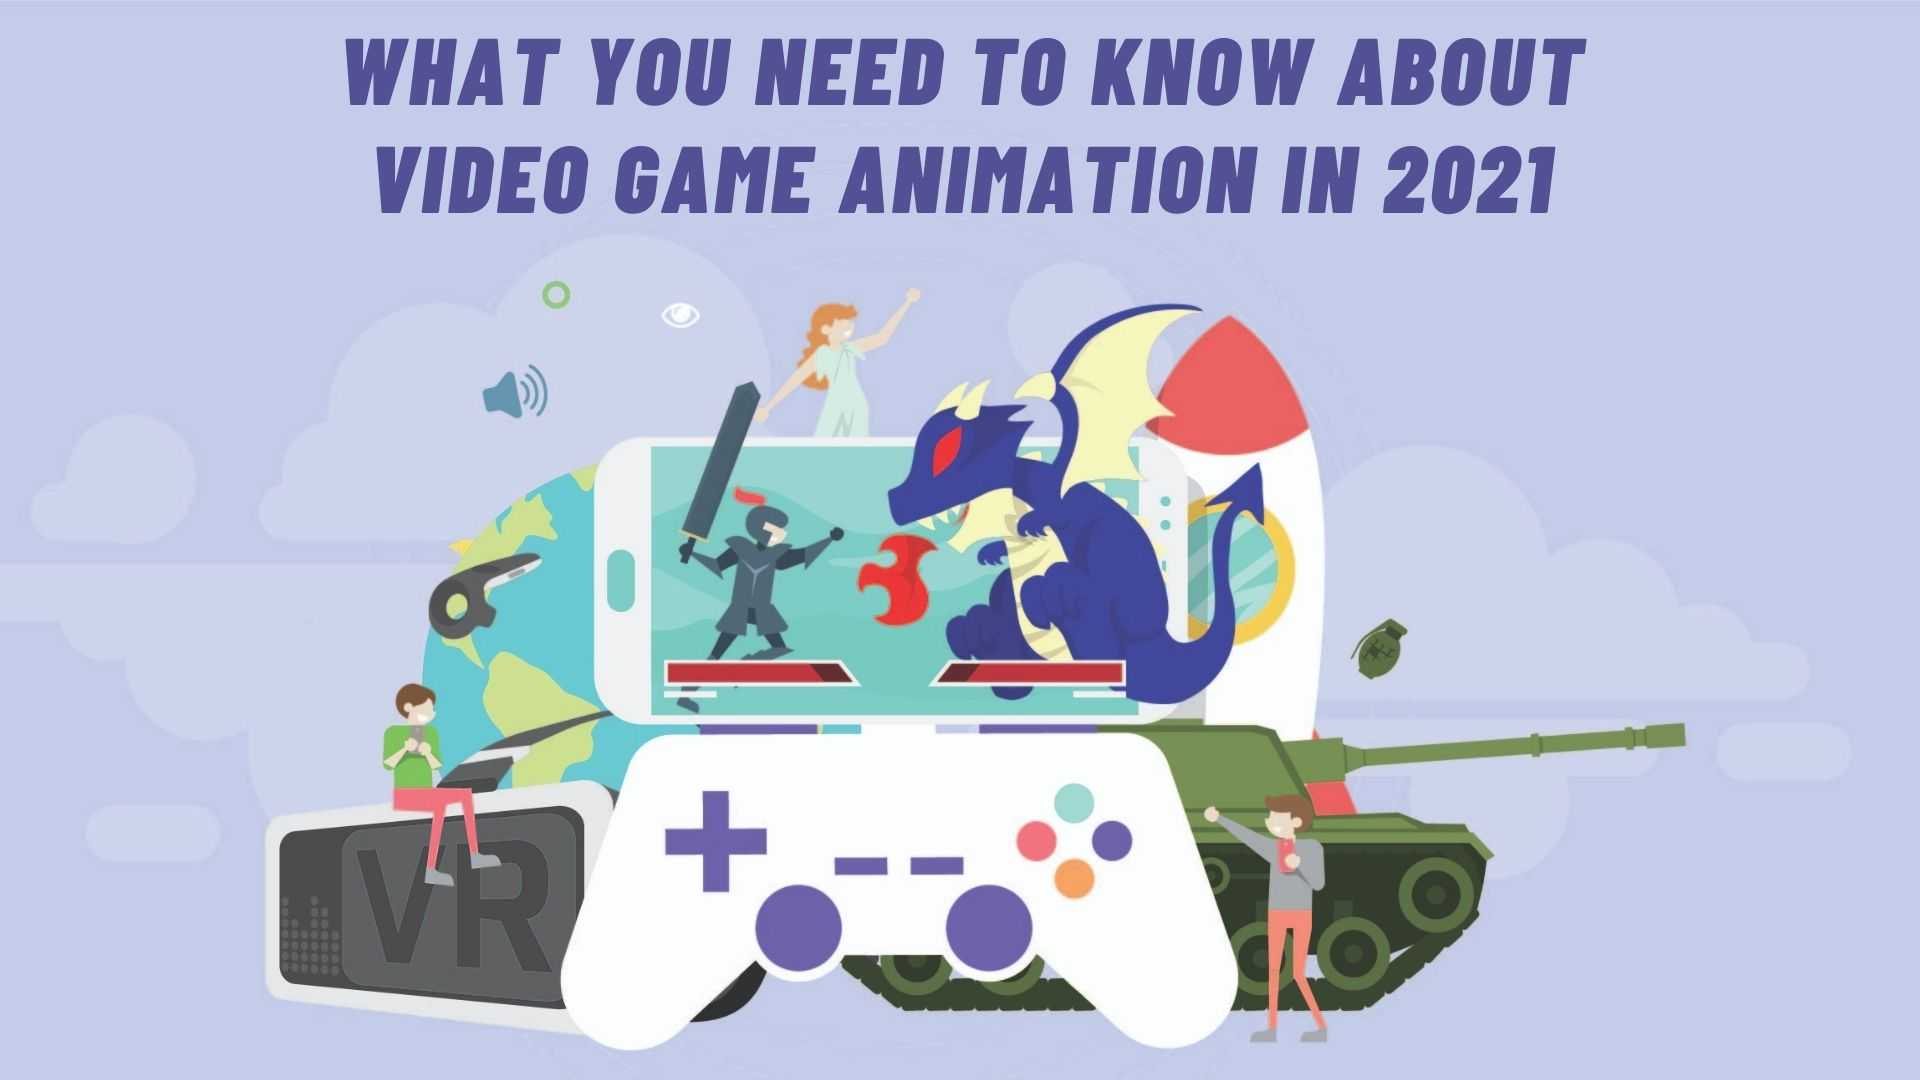 Hot to make animation for Video Games